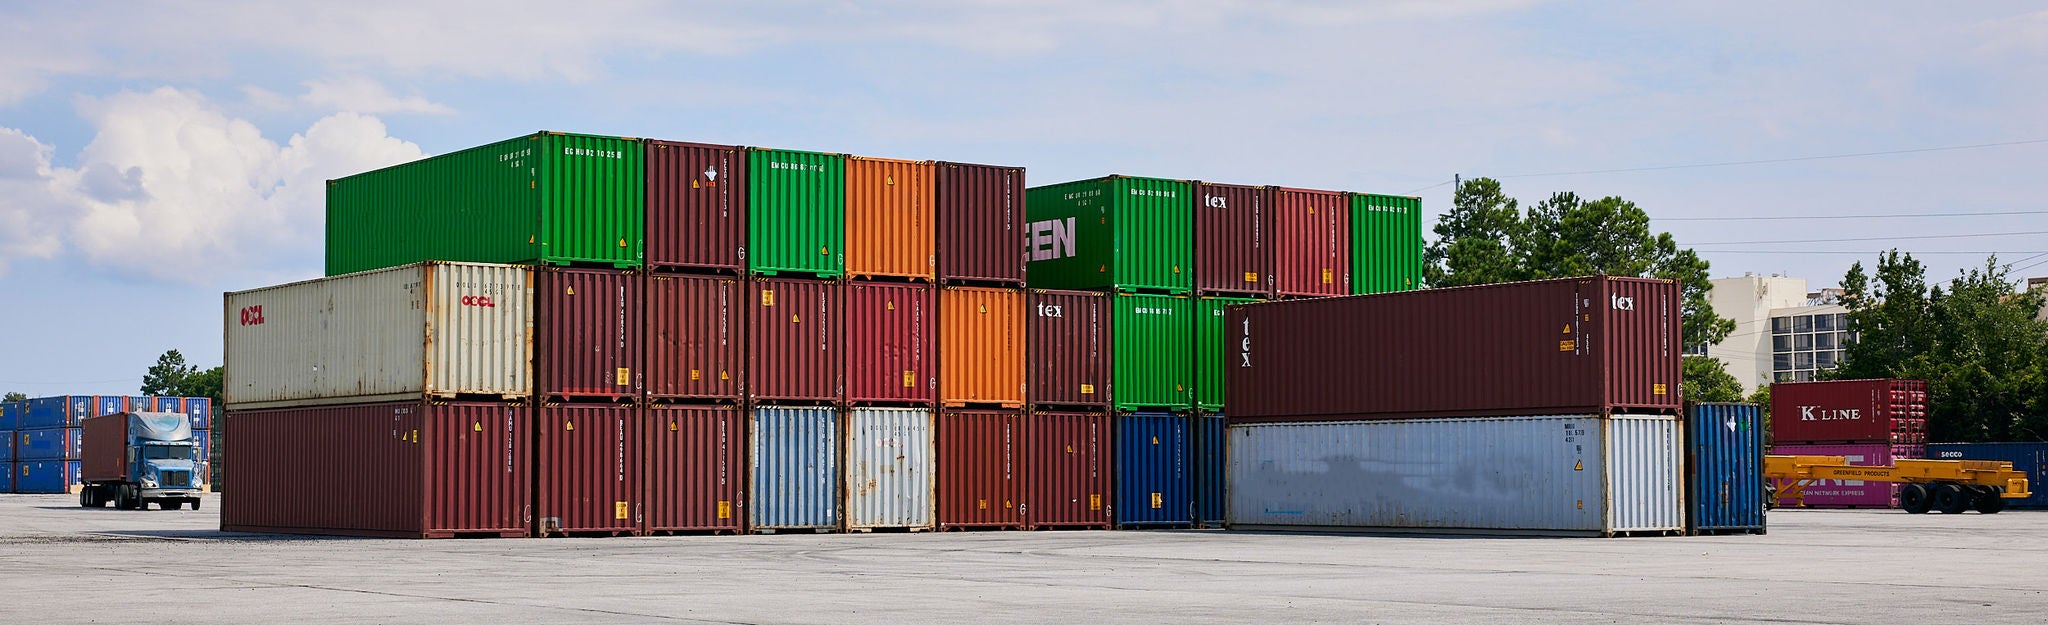 Intermodal containers at seven mile yard maintenance and repair